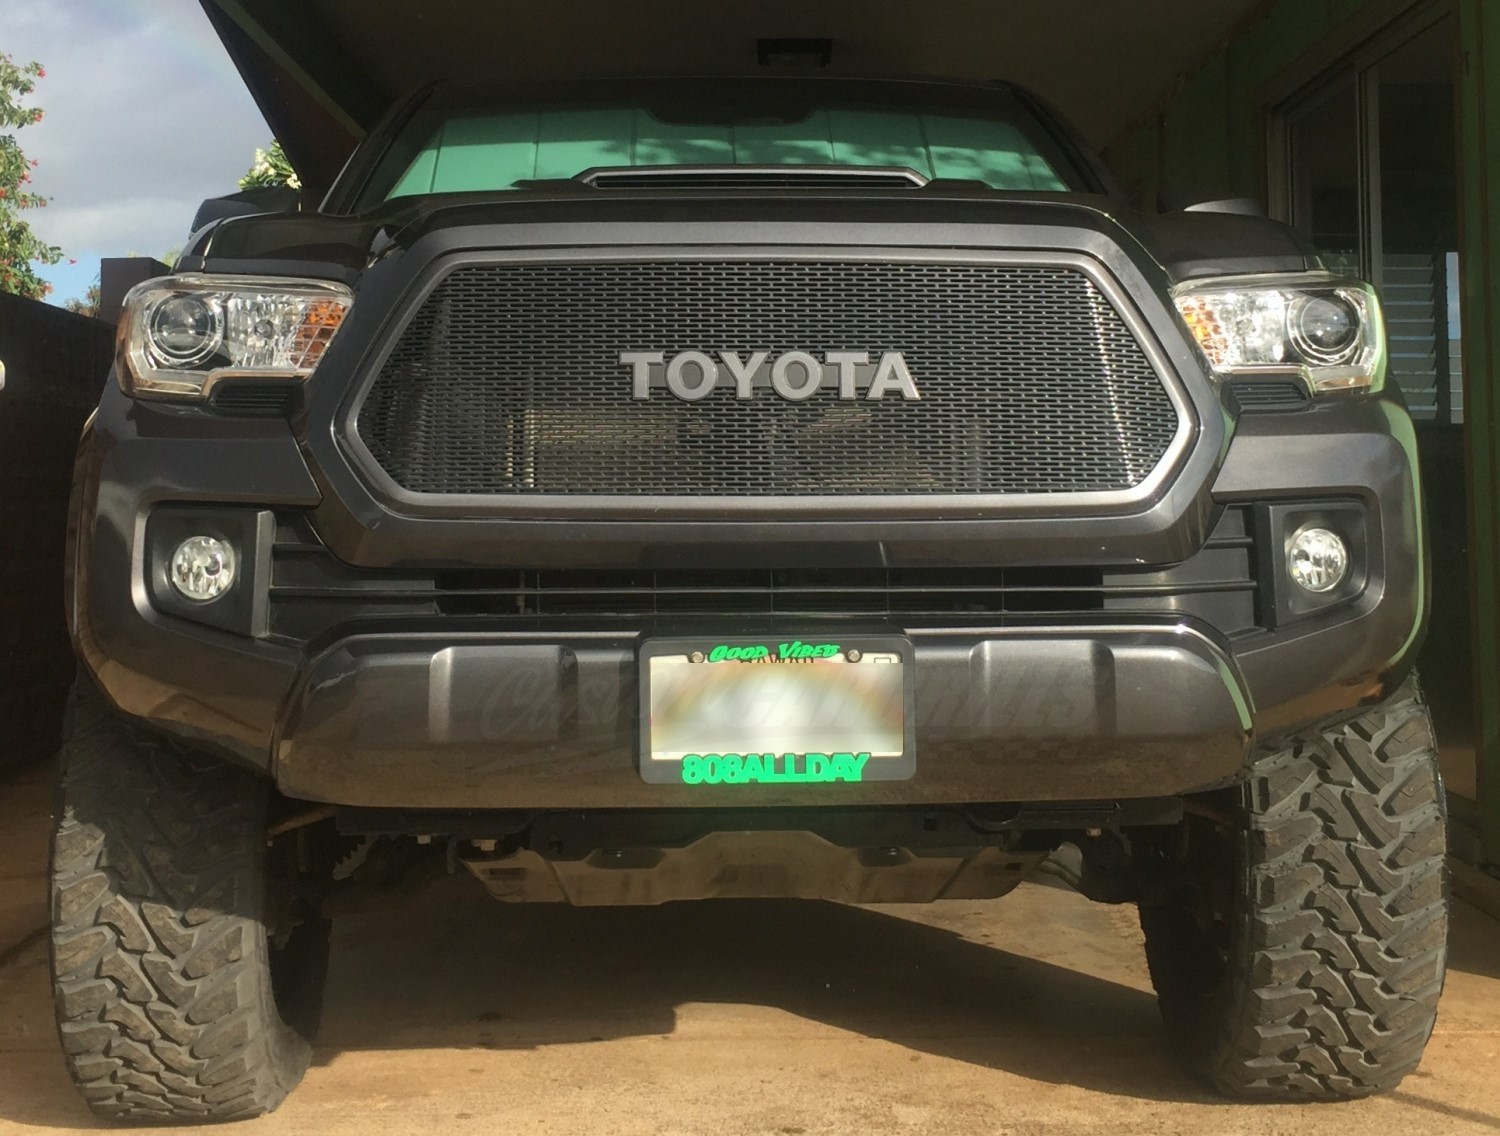 2016 - 2017 Toyota Tacoma Mesh Grill with Bezel and Emblem #5.